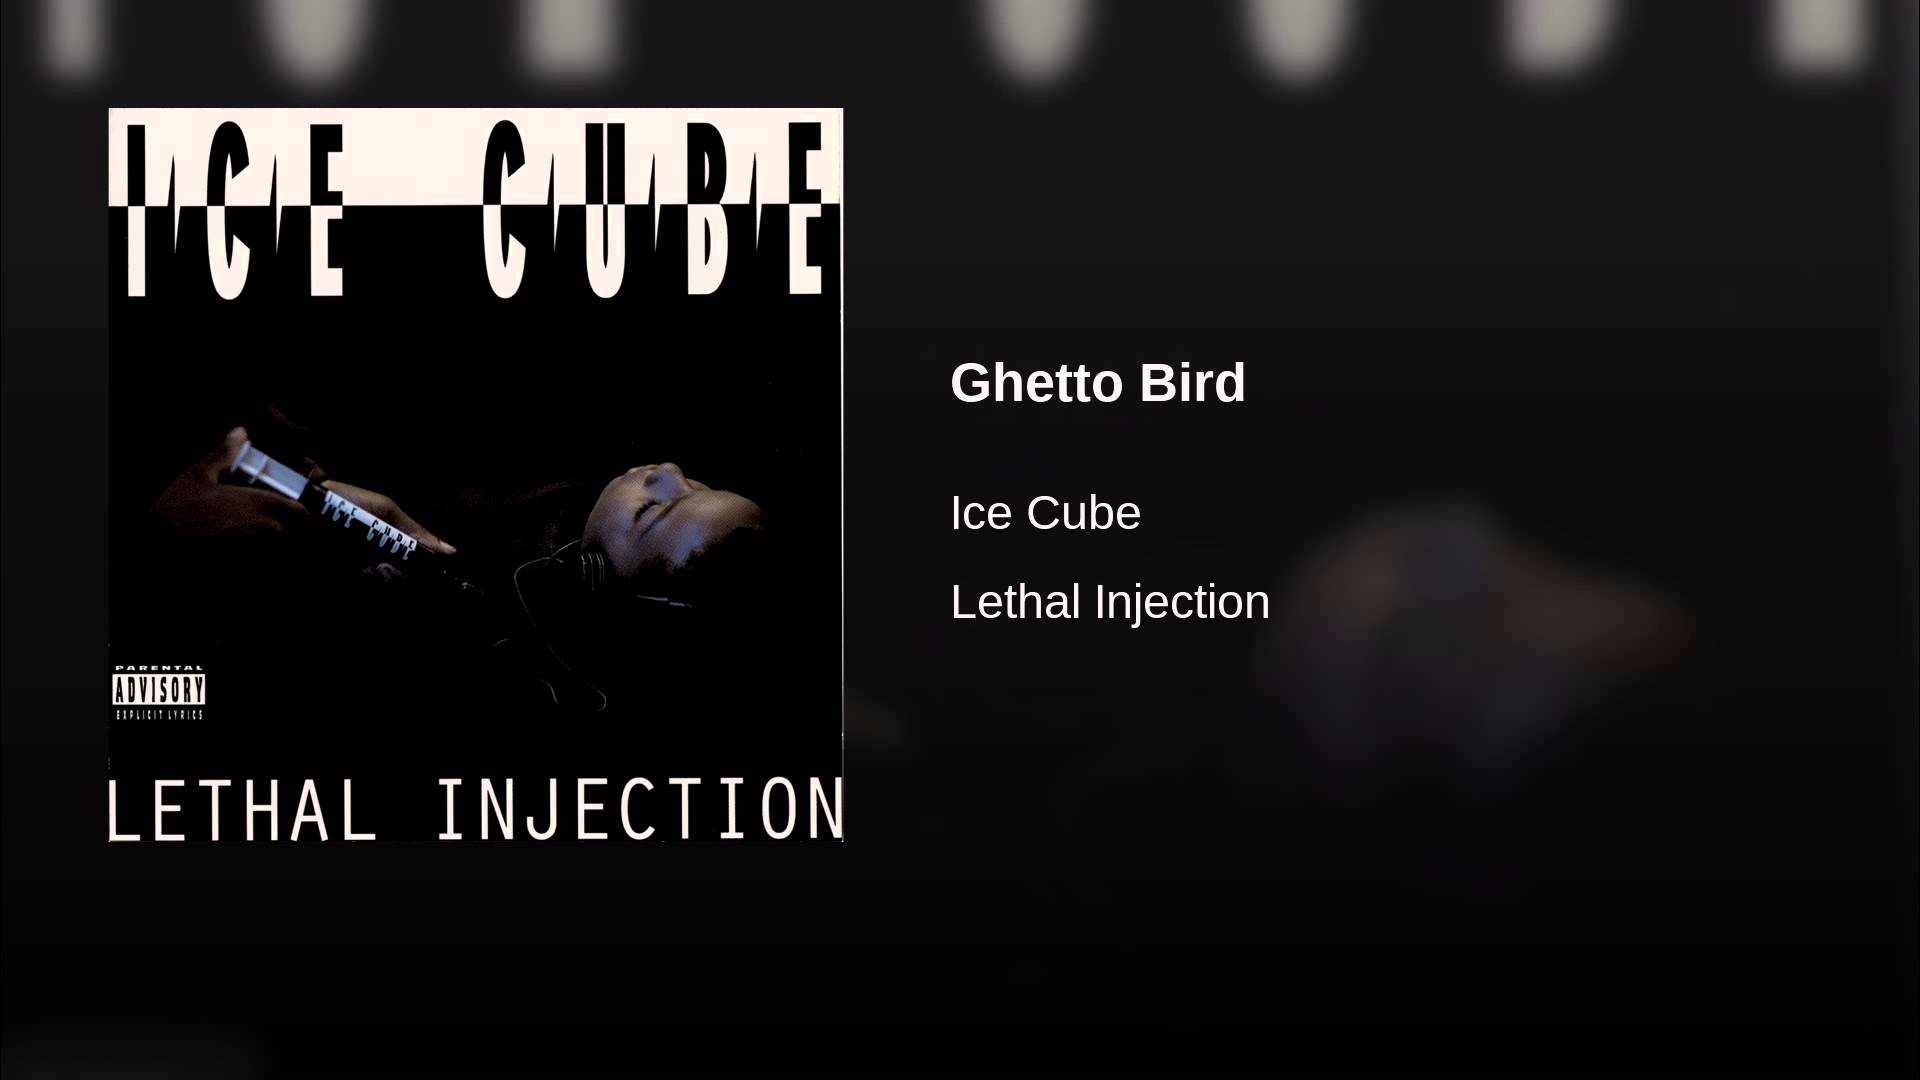 Ice cube you know how. Ice Cube you know how we do it. Ice Cube Lethal Injection. Ghetto Bird от Ice Cube.